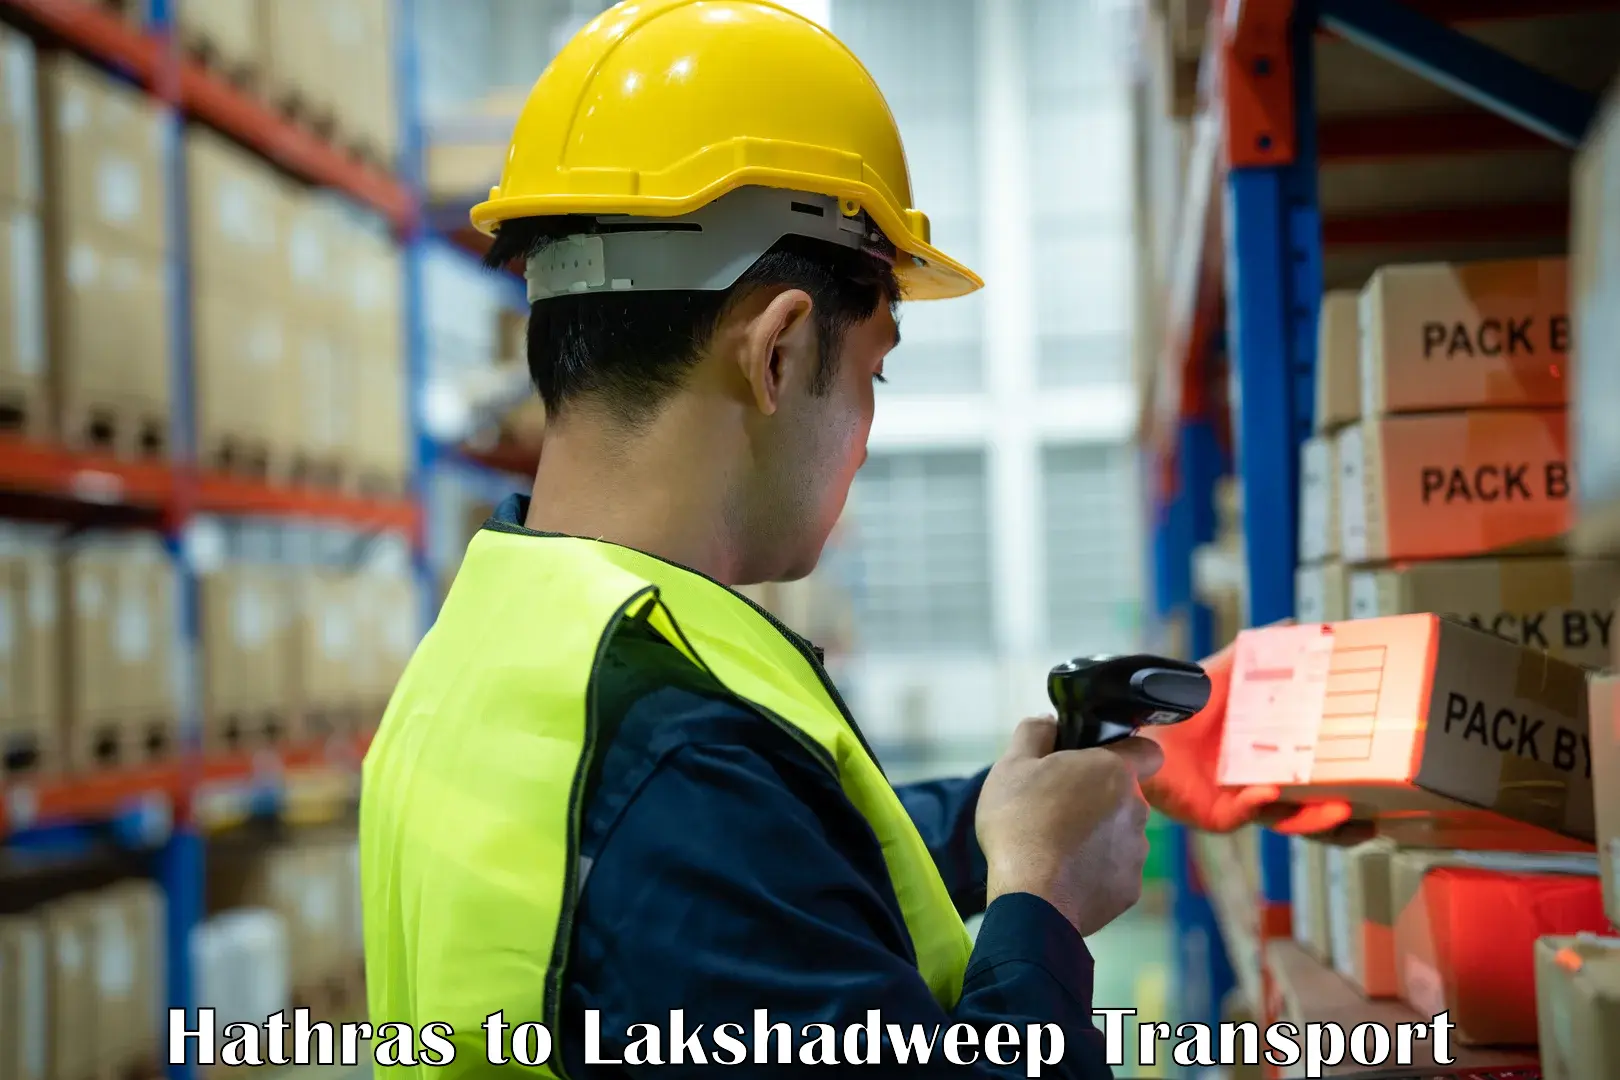 Container transport service Hathras to Lakshadweep